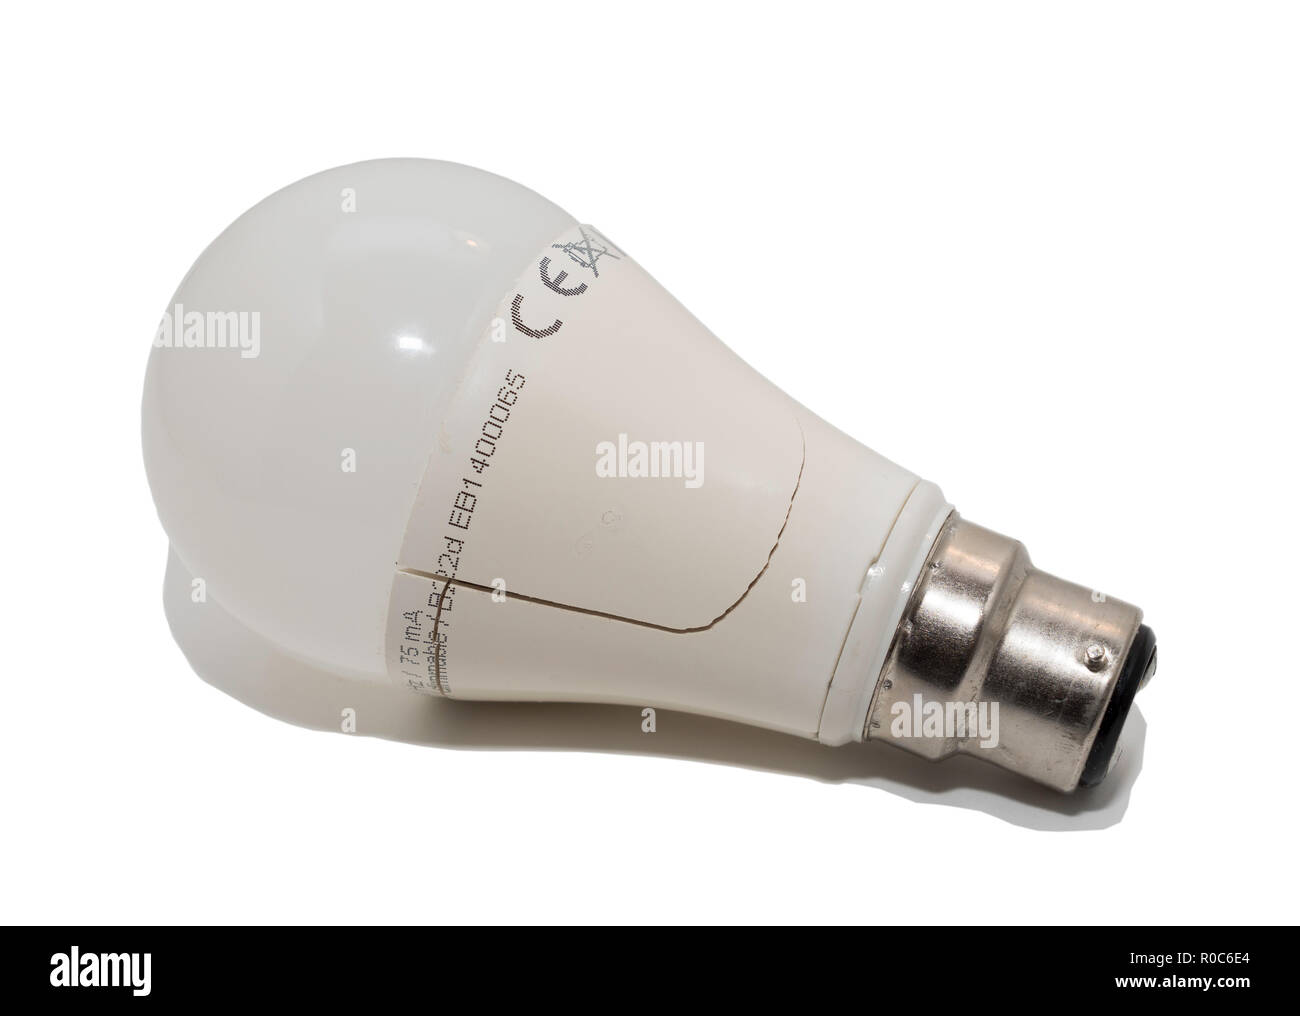 LED light bulb with crack in housing, isolated on a white background. Stock Photo